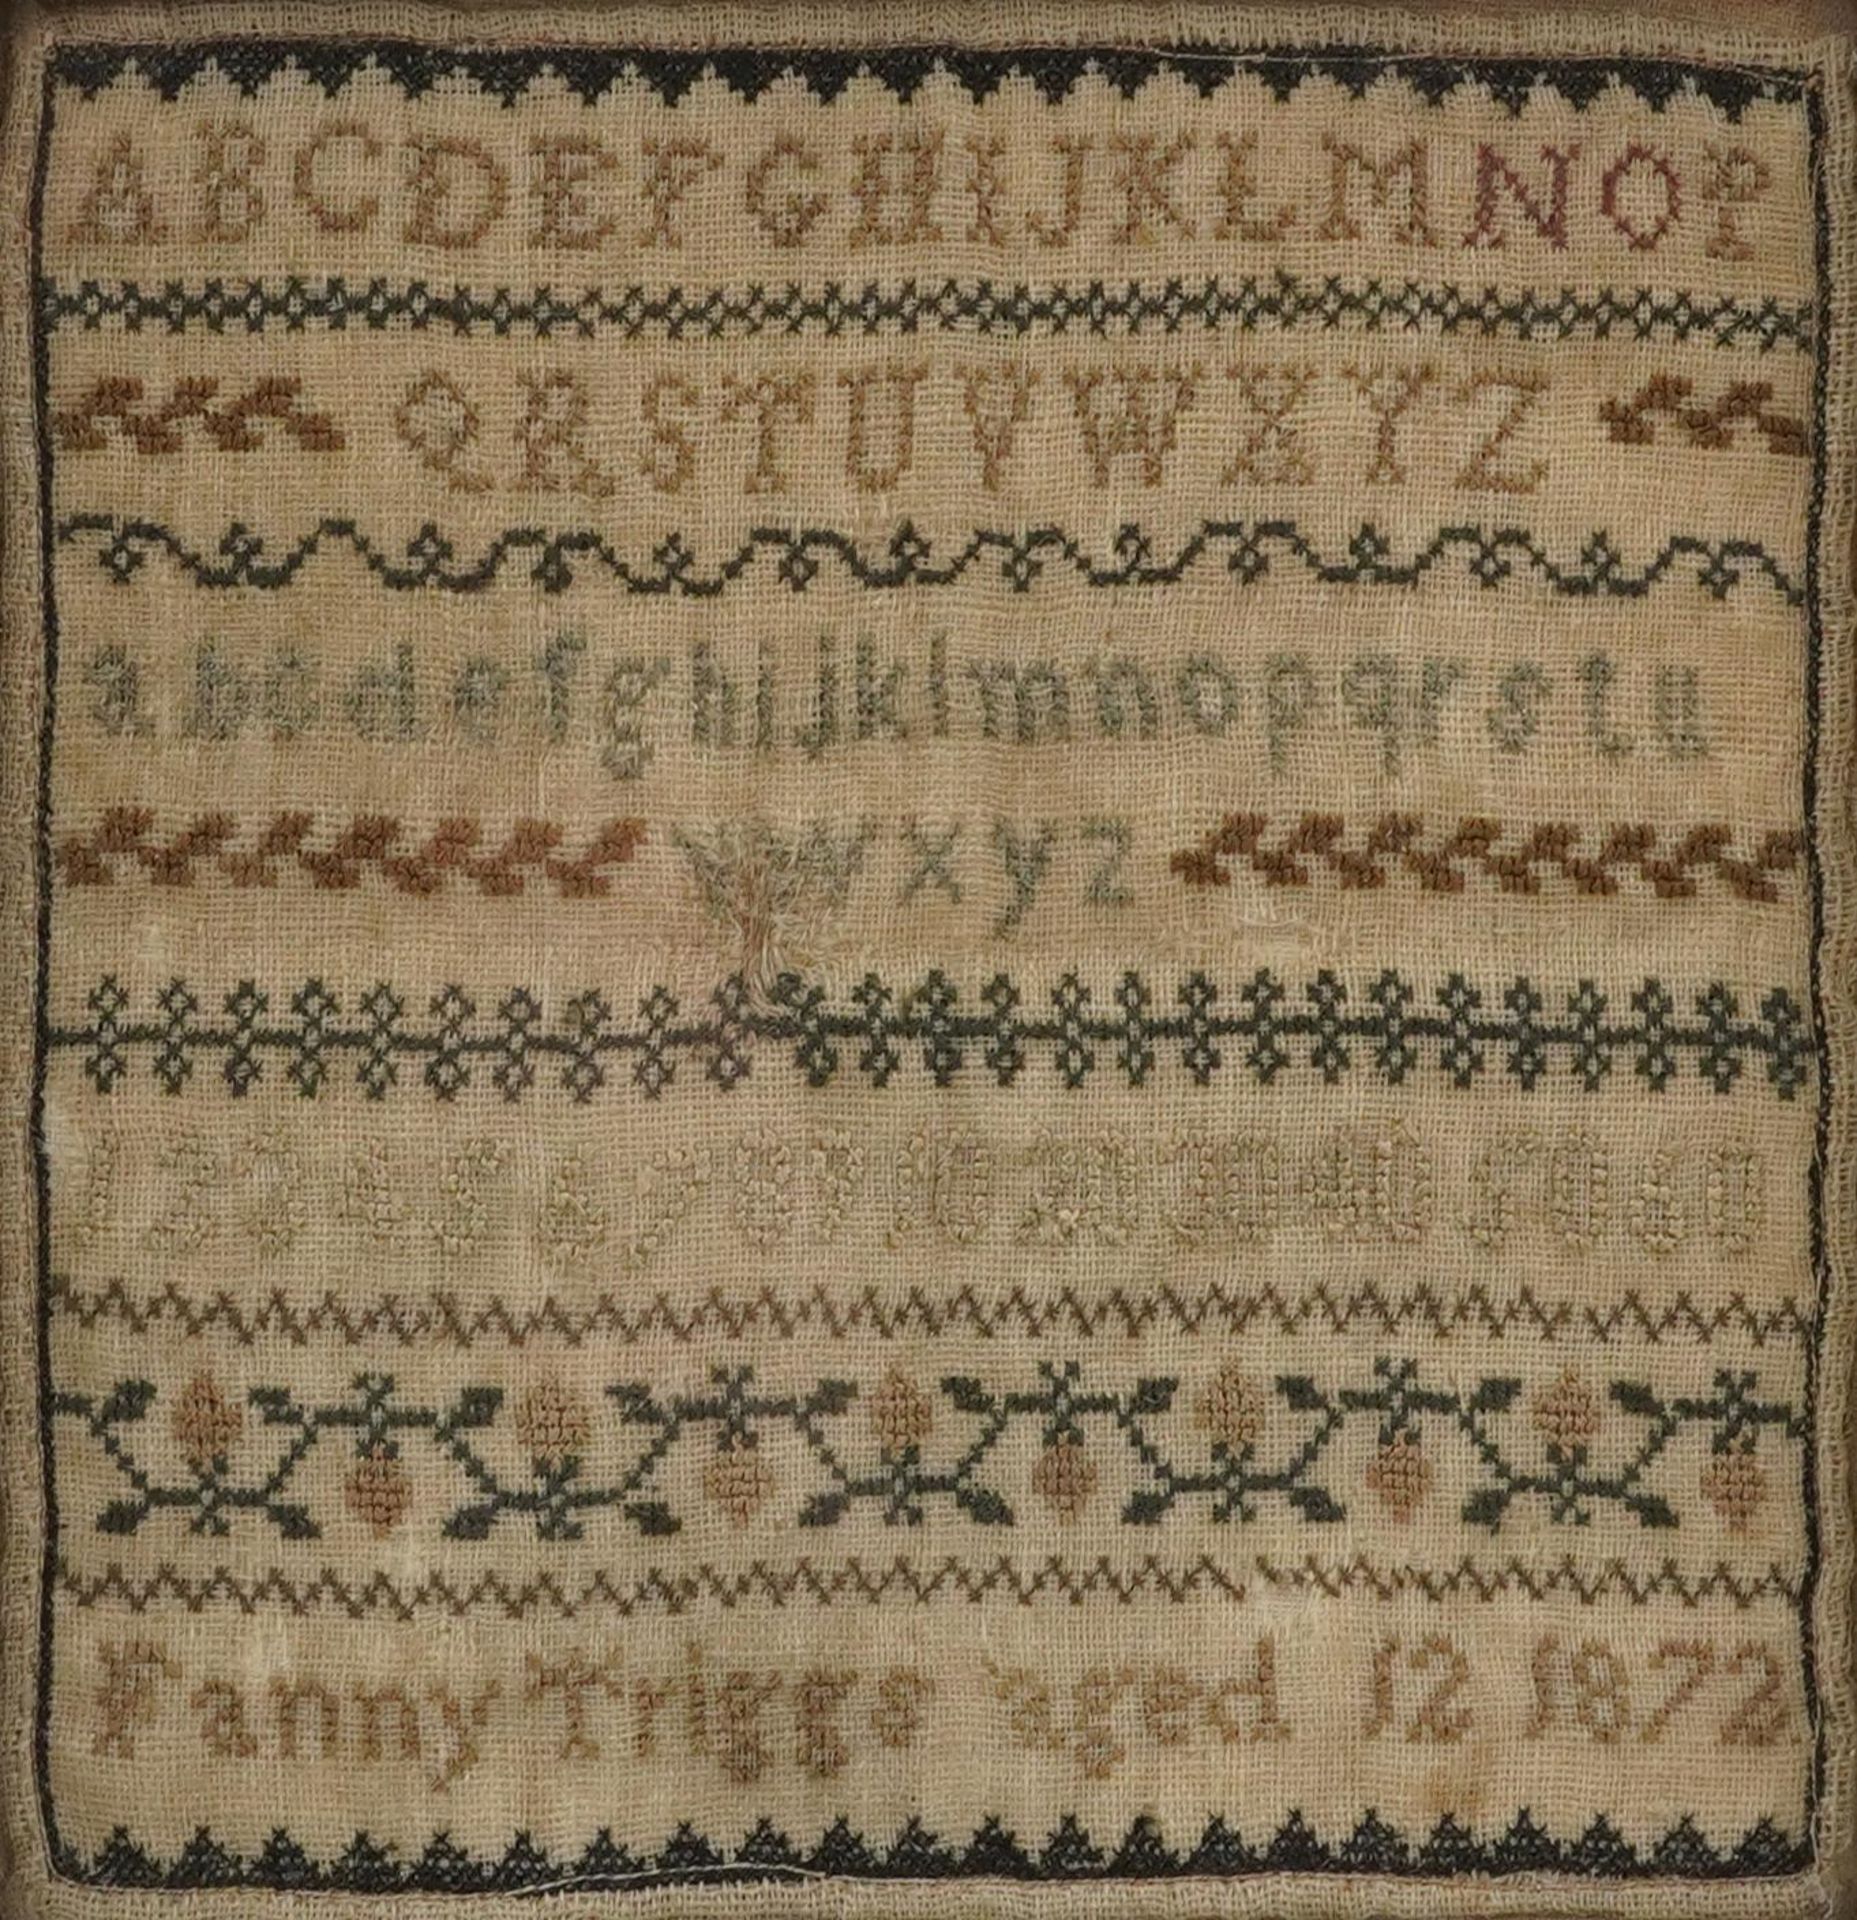 Victorian needlework sampler worked by Fanny Triggs aged 12 1872, mounted, framed and glazed, 15cm x